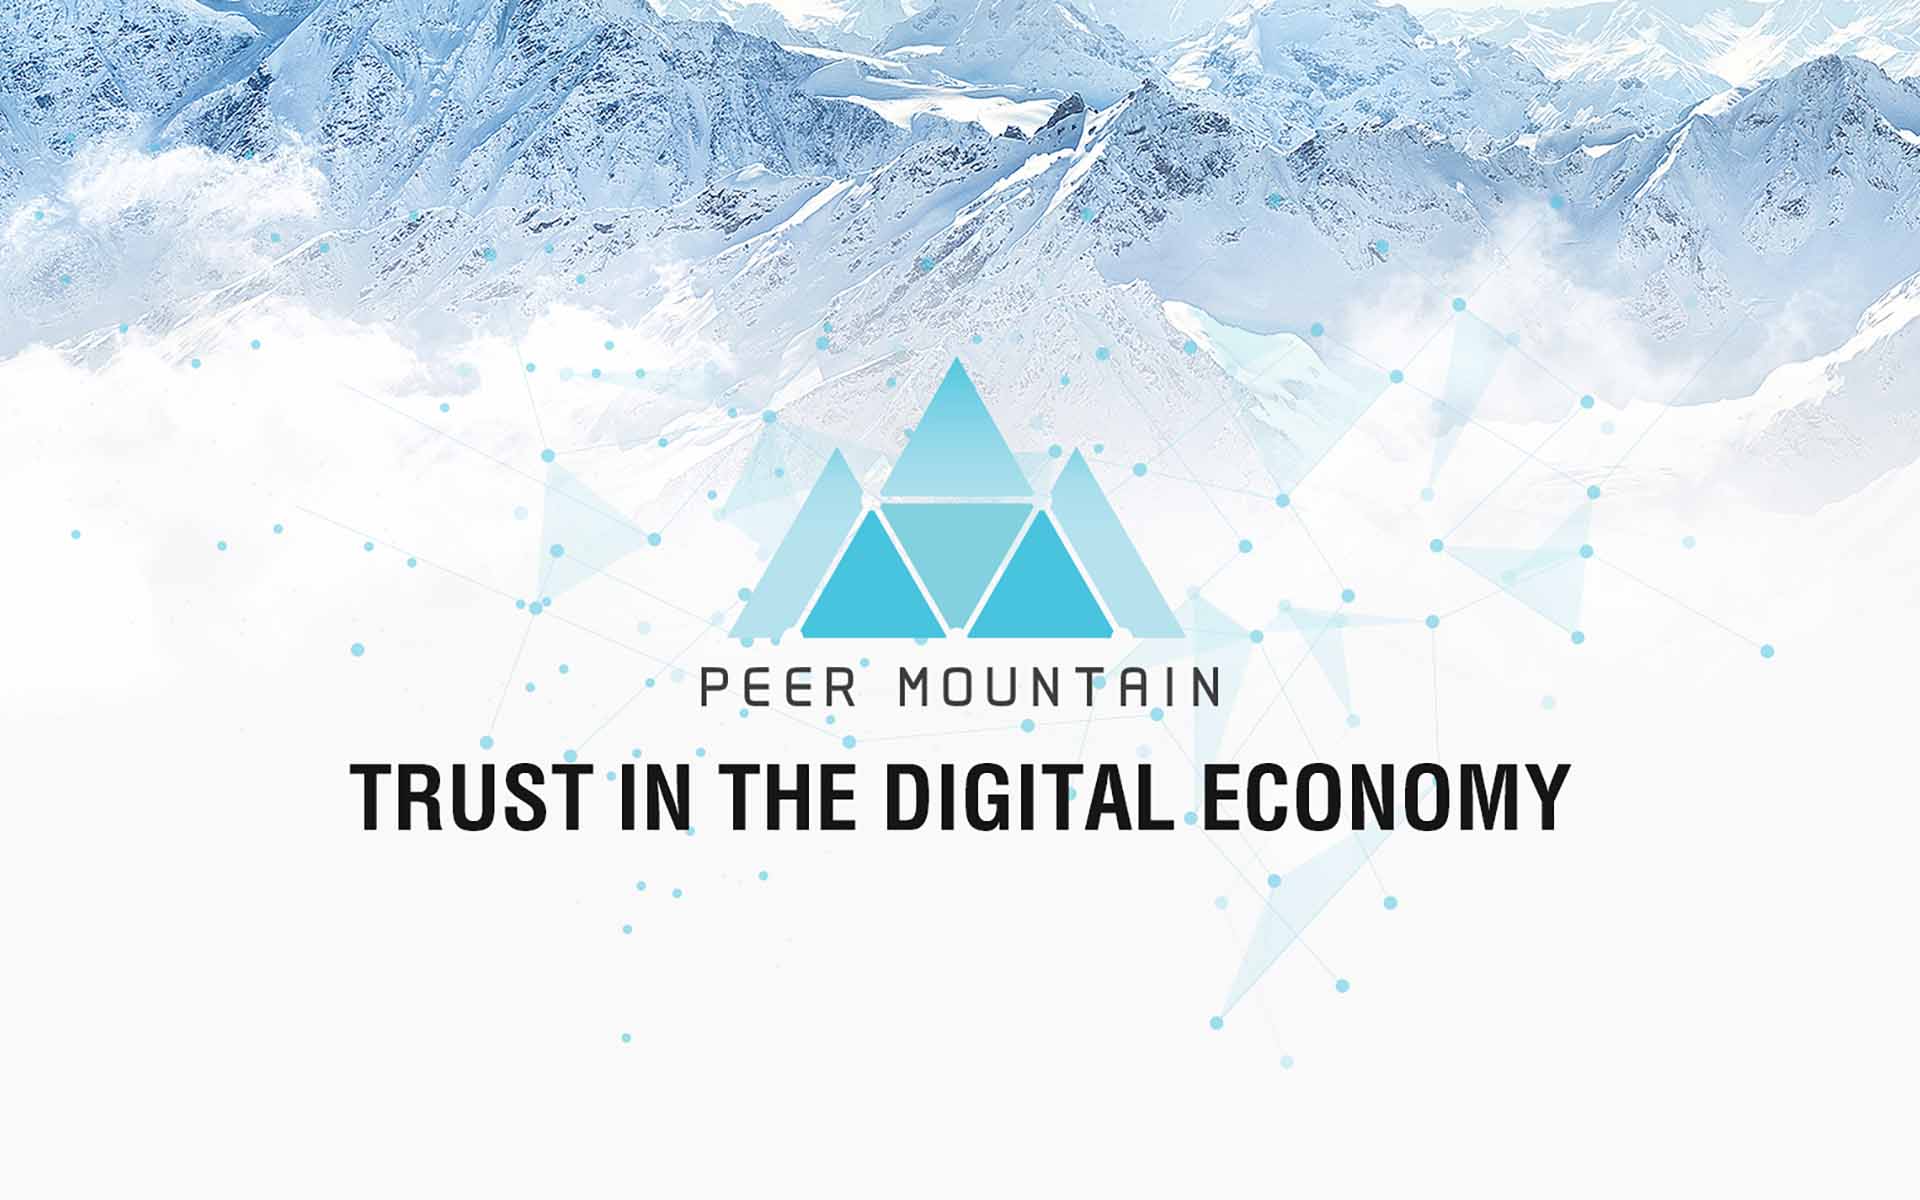 Peer Mountain Announces Partnership with TokenMarket for Token Generation Event